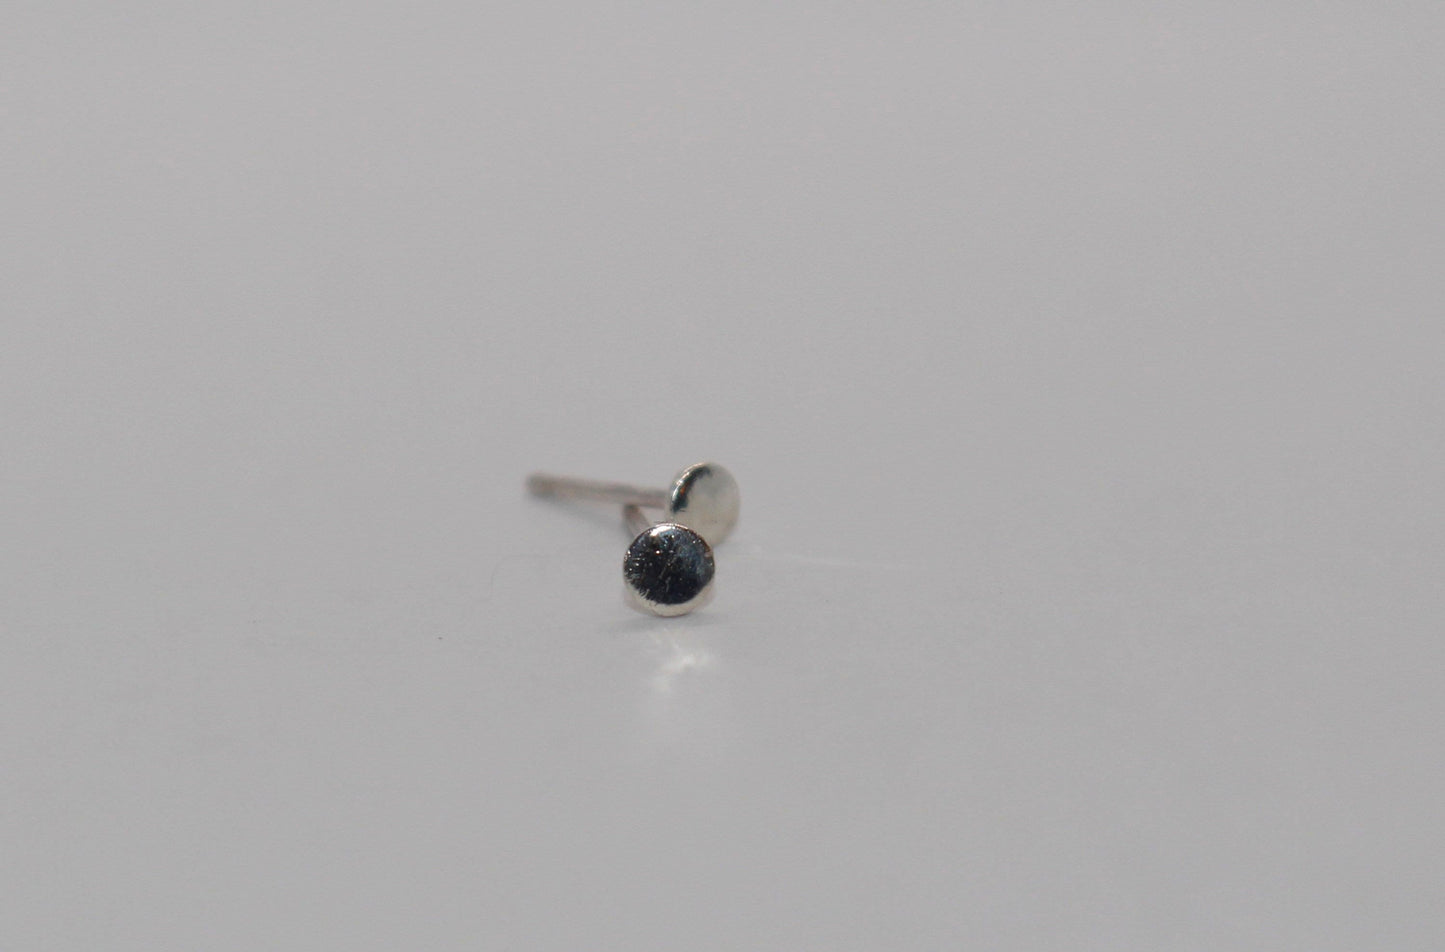 Tiny Dot Stud Earrings available in 14k Gold Fill and Sterling Silver